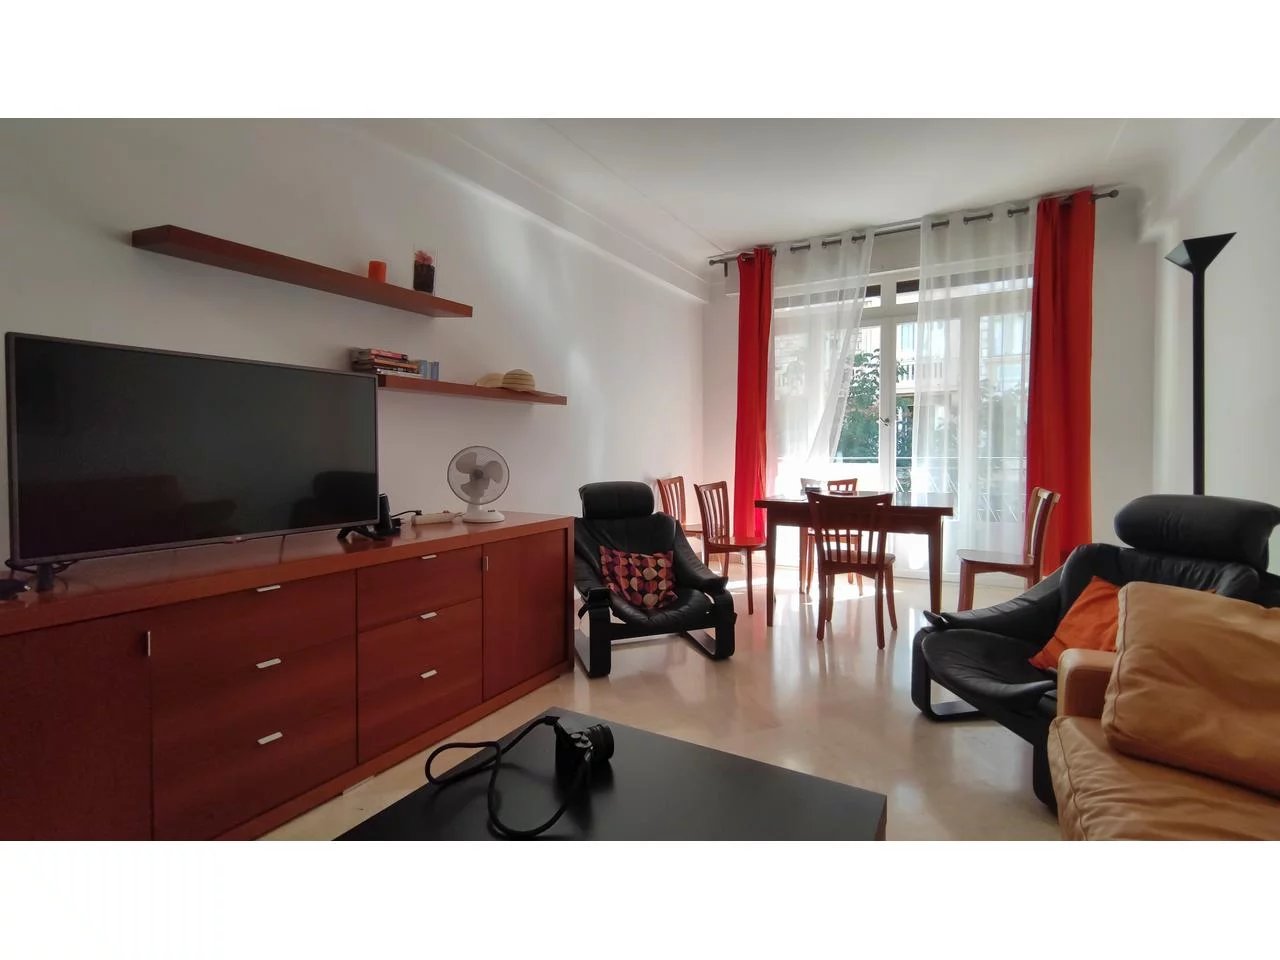 Appartement  3 Rooms 68m2  for sale   516 000 €